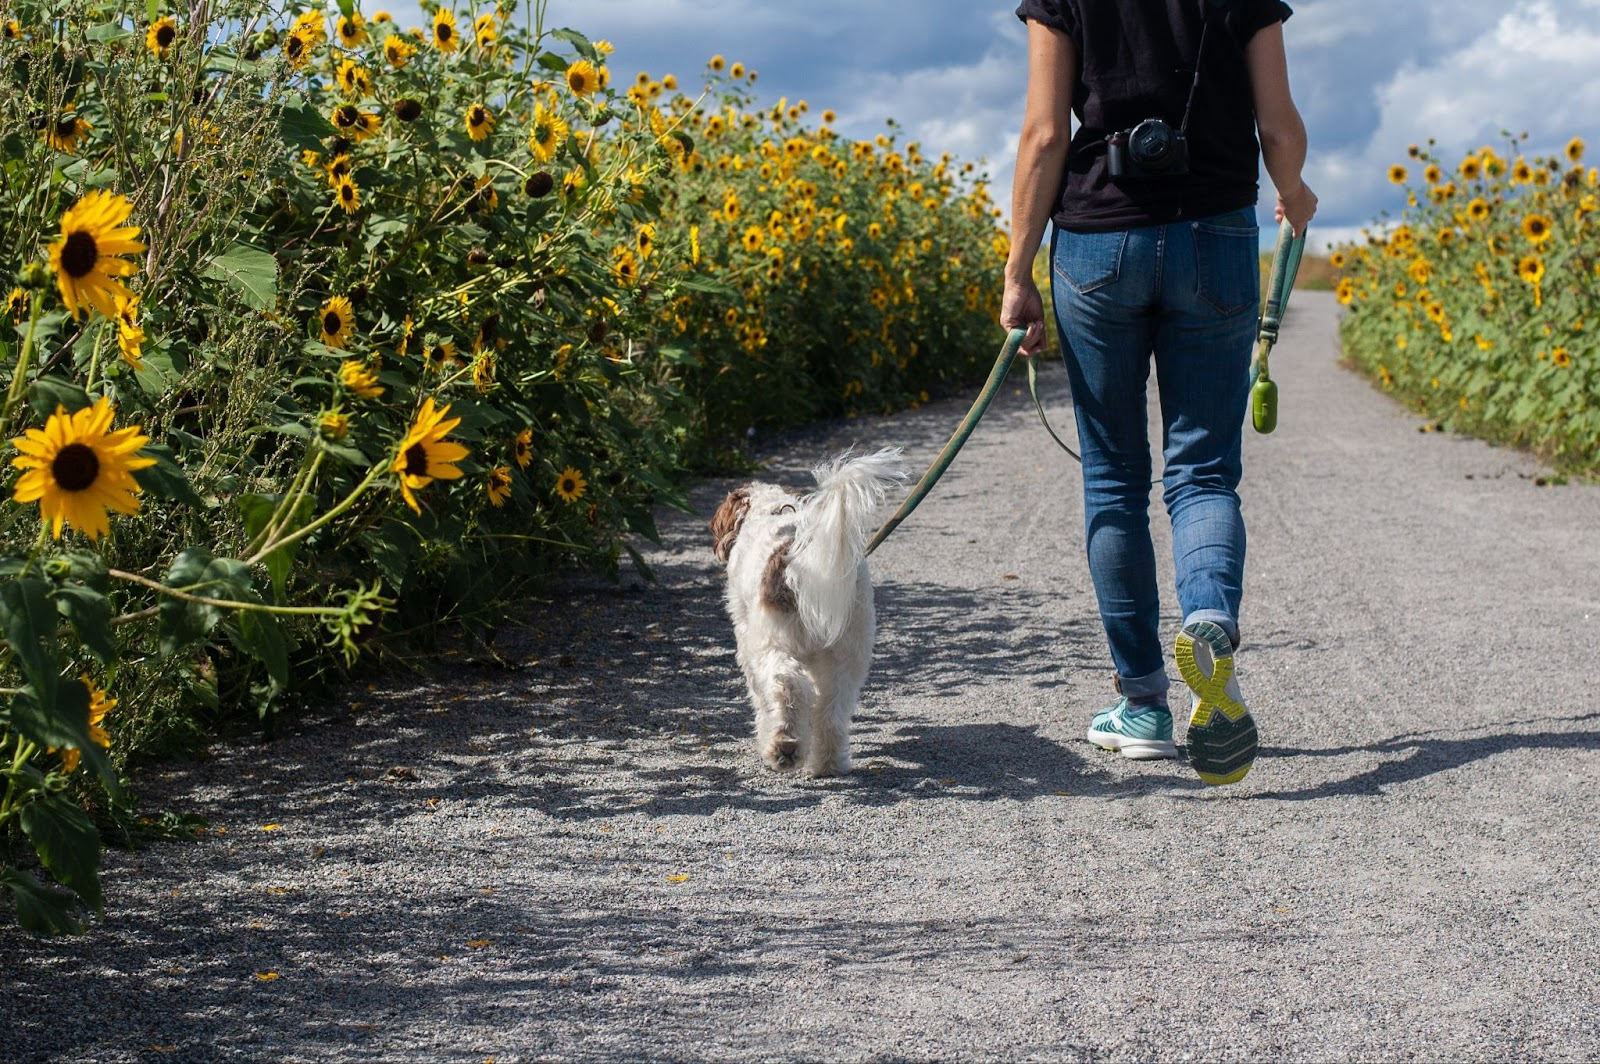 A brown and white-haired dog on a leash walking with its owner on a road surrounded by sunflowers